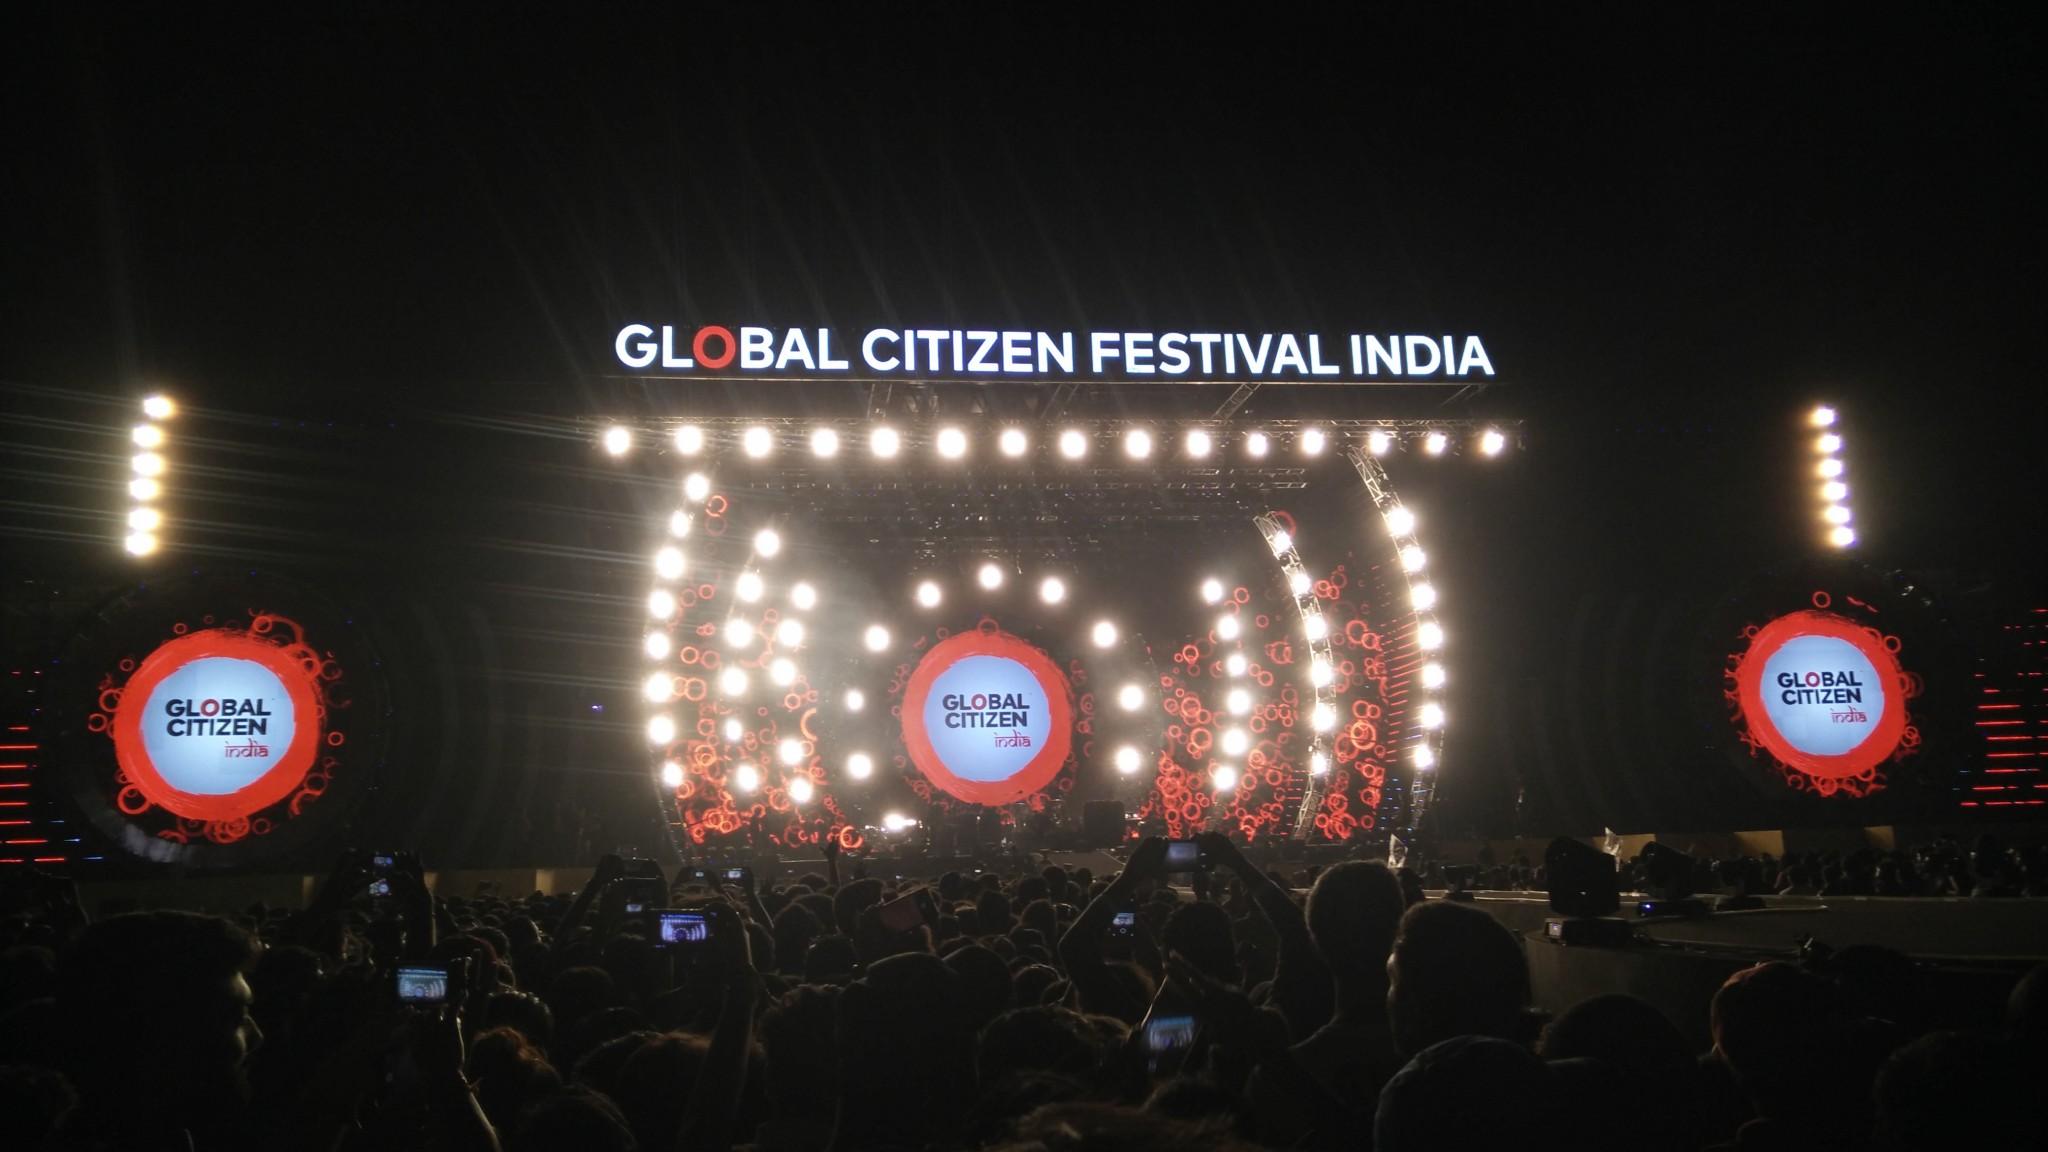 Review: The Global Citizen Festival India 2016 Is Going Down